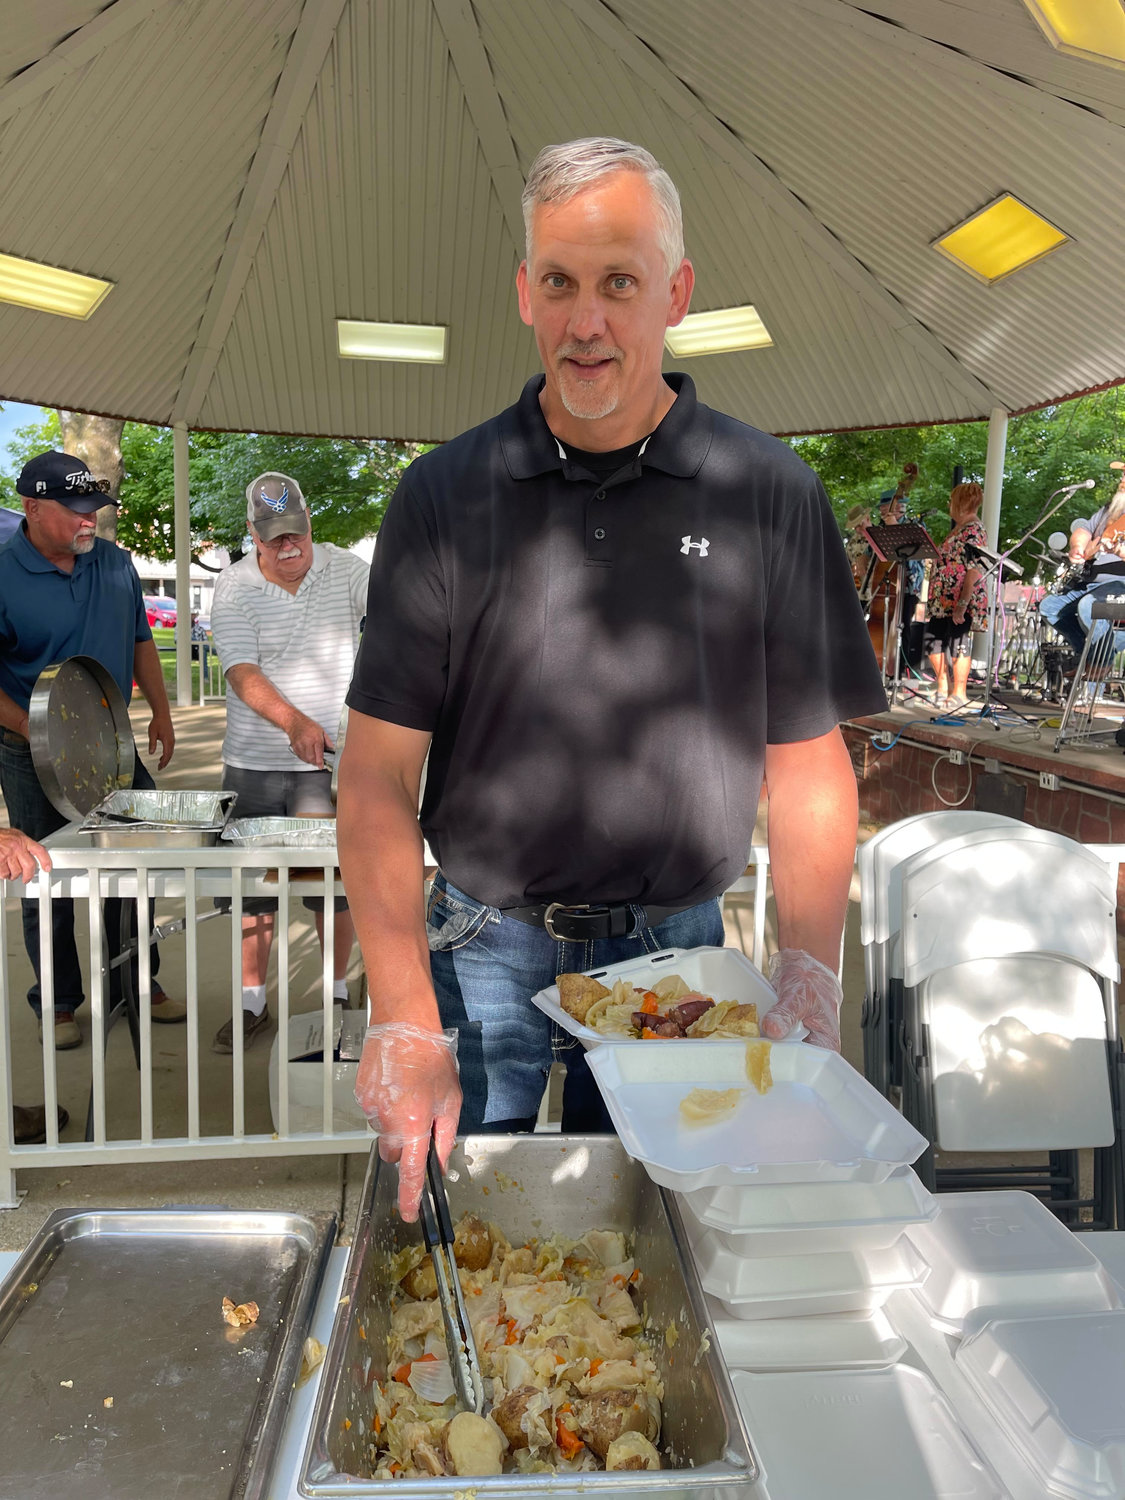 “Guy” serves food to hungry patrons at the Trash Can Feed on June 4 in Seymour. Plates were $10 each and benefited the King’s Food Pantry. 50lbs each of potatoes, carrots, onions and cabbage, along with corn and sausage made up the meal cooked by The Masons.